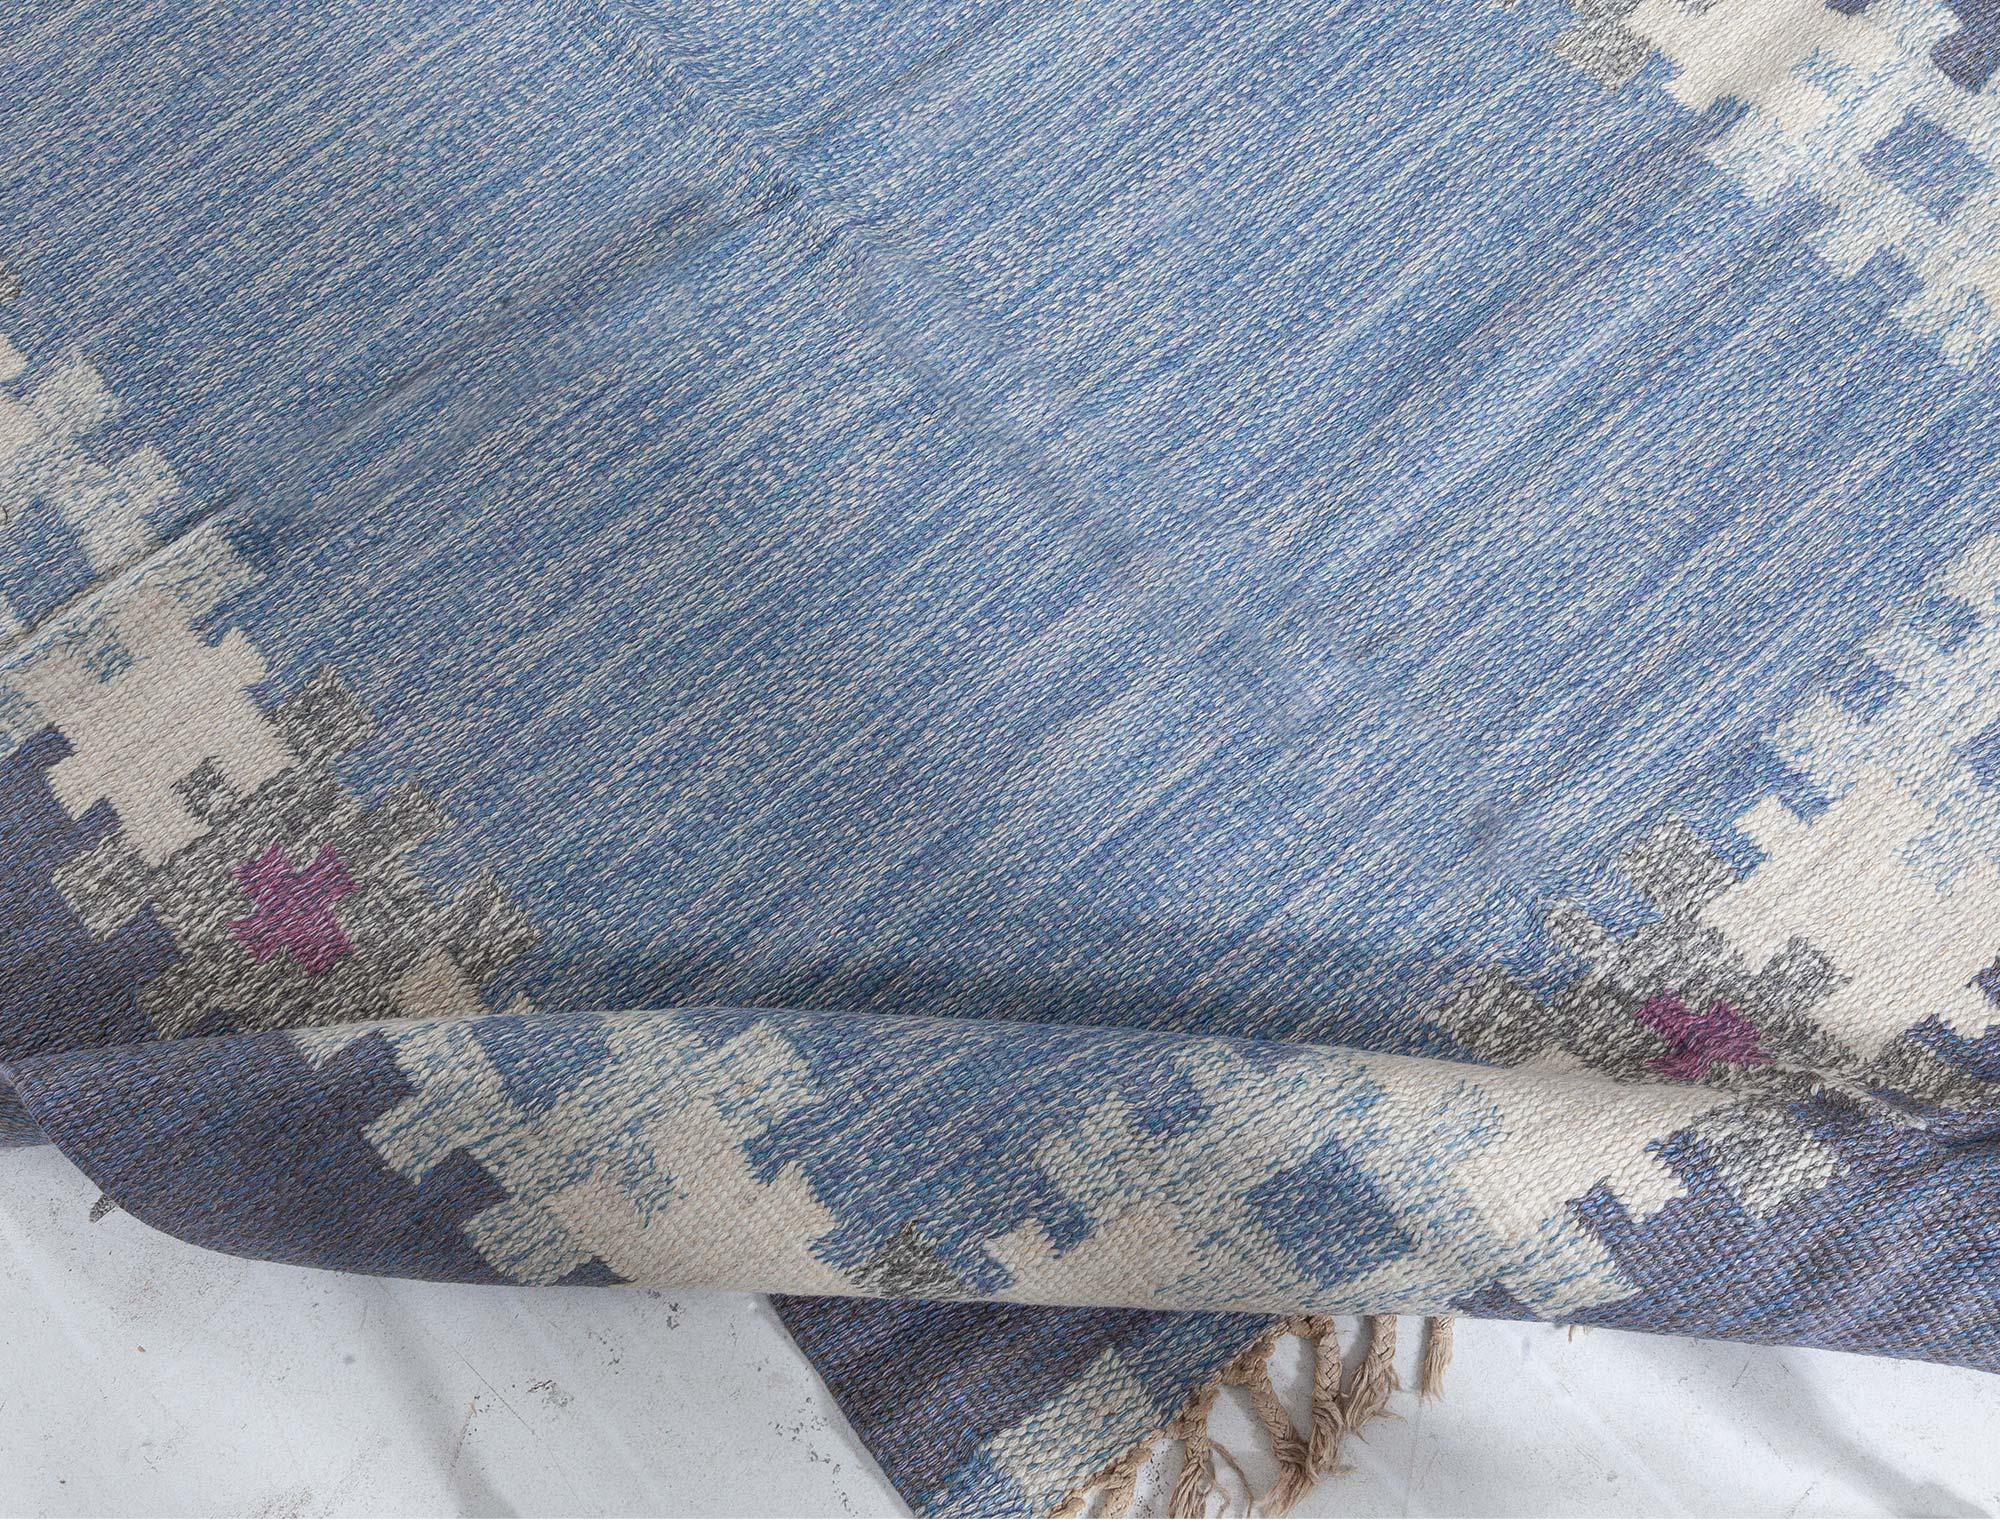 Hand-Woven Midcentury Swedish Blue Rug by Ingegerd Silow Woven I.S For Sale